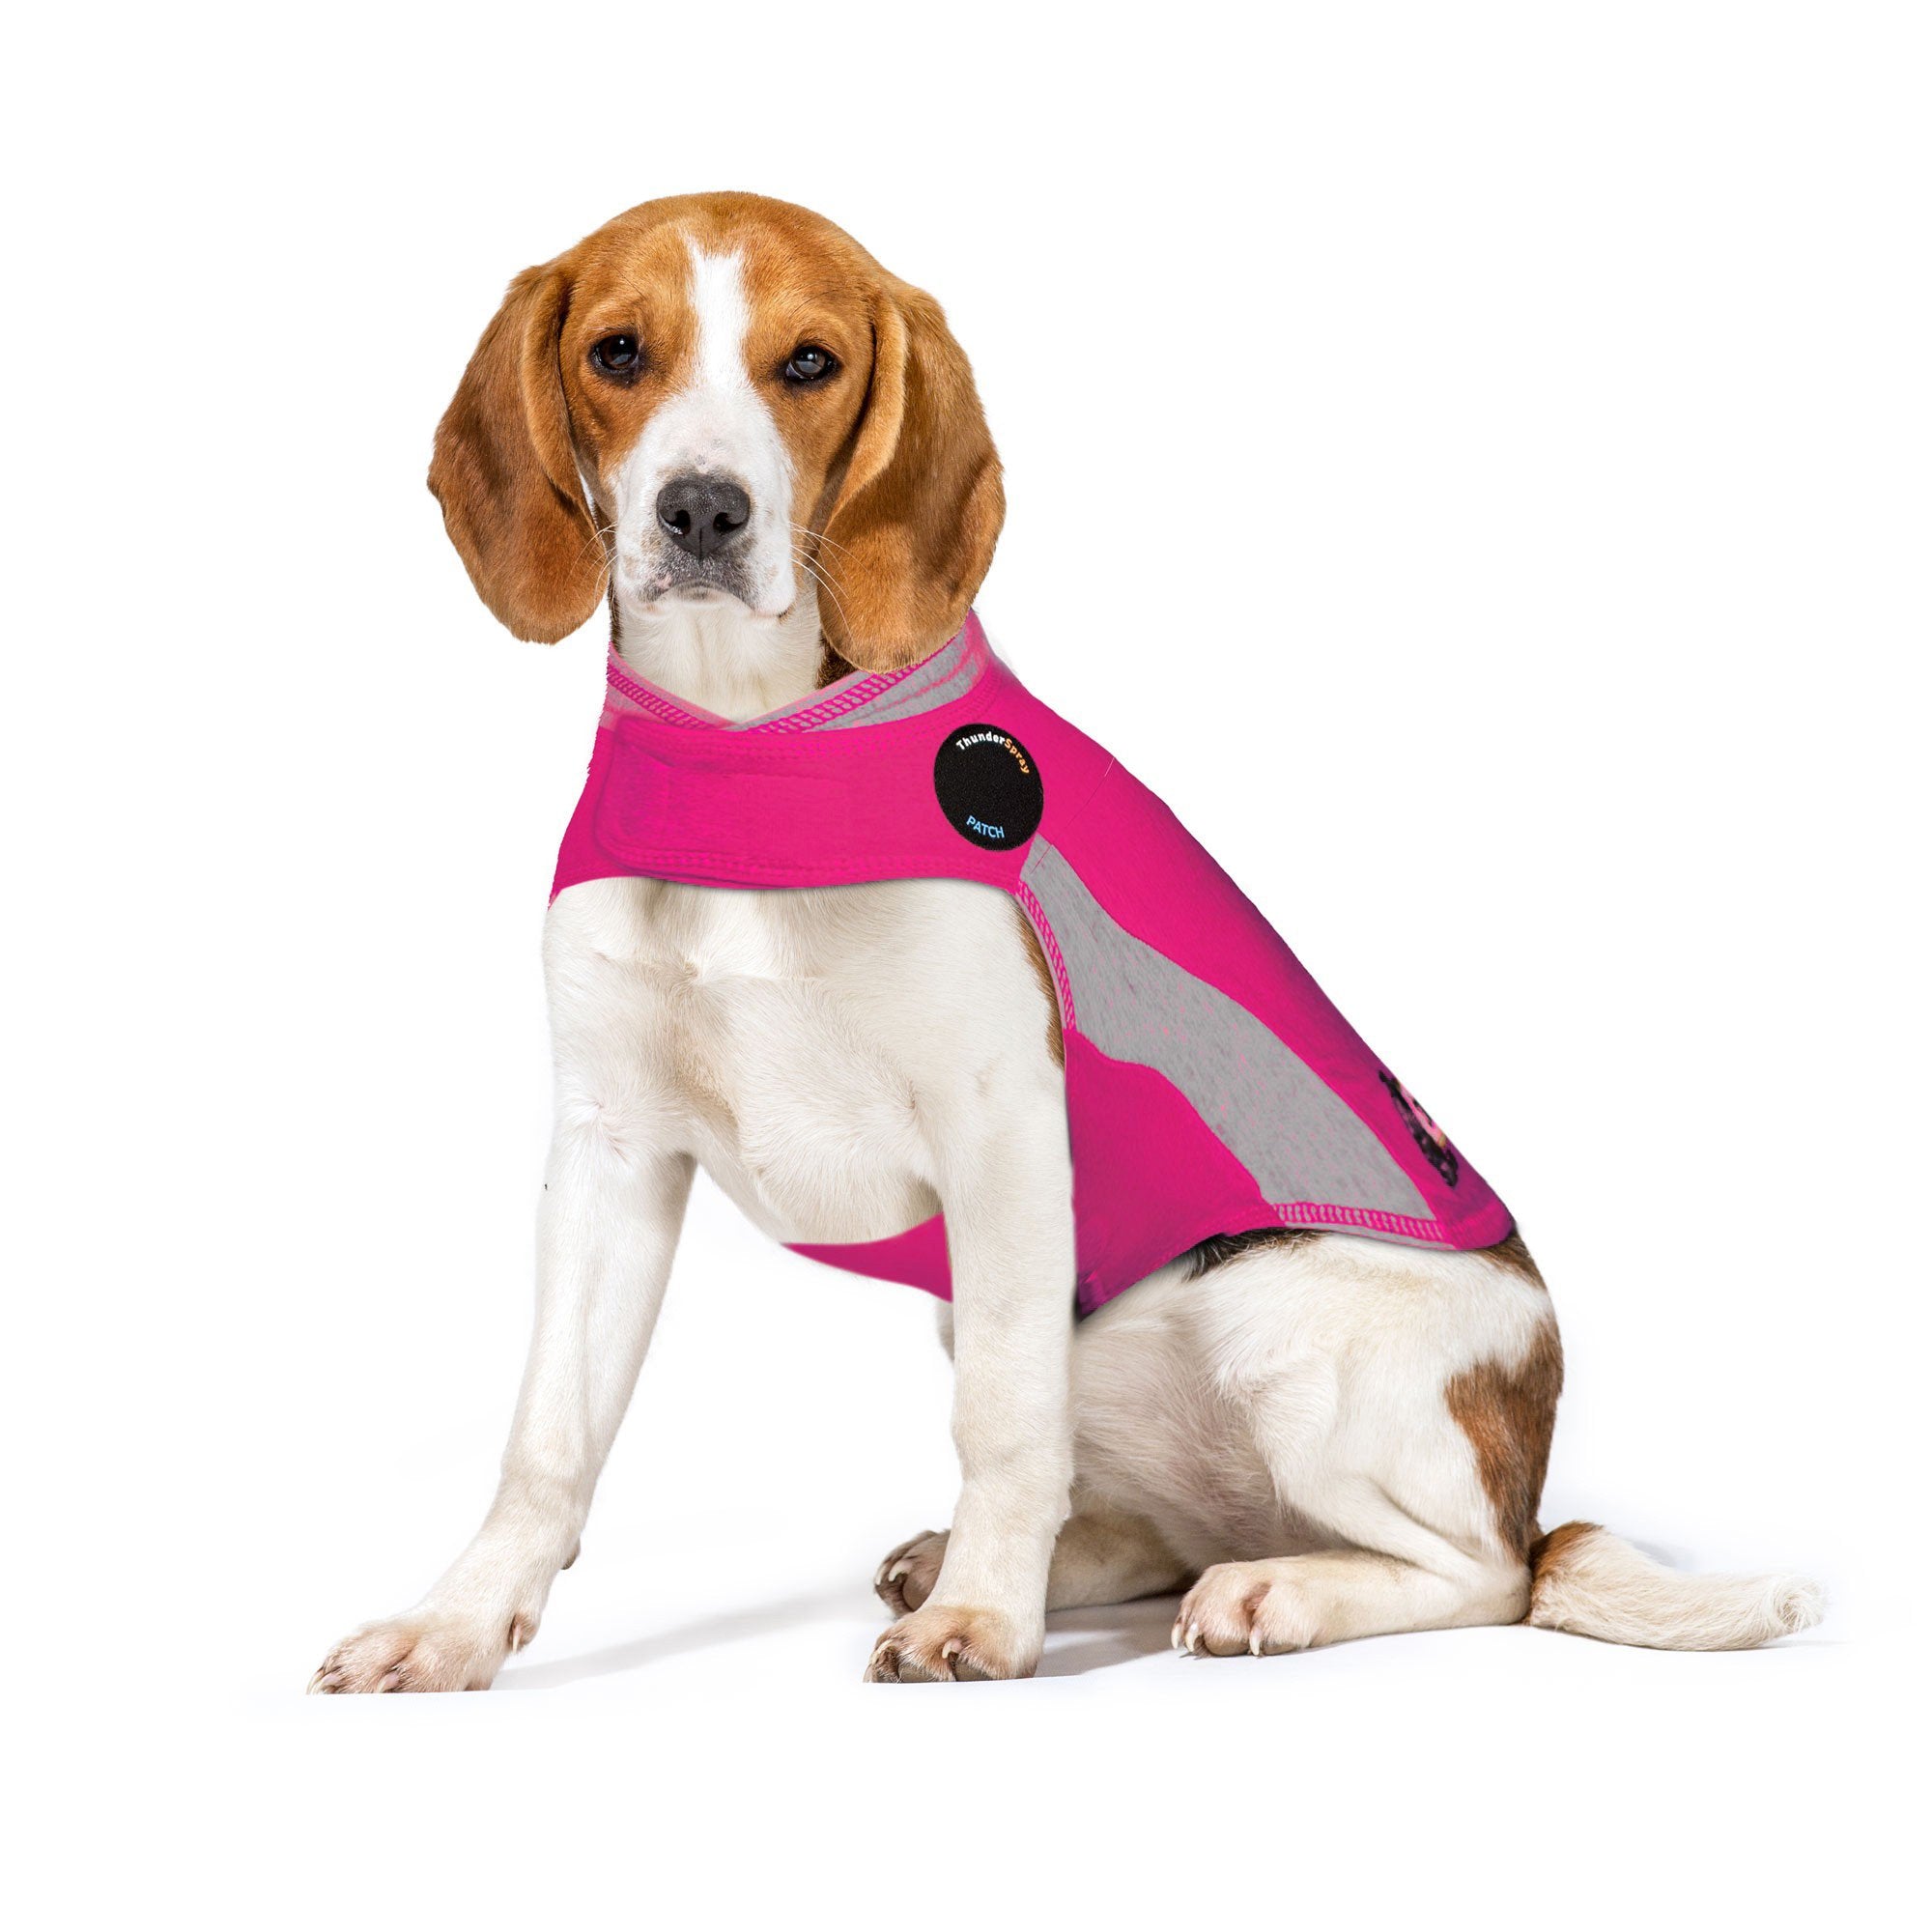 XL QIYADIN Dog Comfort Dog Anxiety Relief Coat Breathable Thunder Shirts for Dogs Dog Anxiety Vest Jacket Warp Puppy Anxiety Calming Vest Wrap 